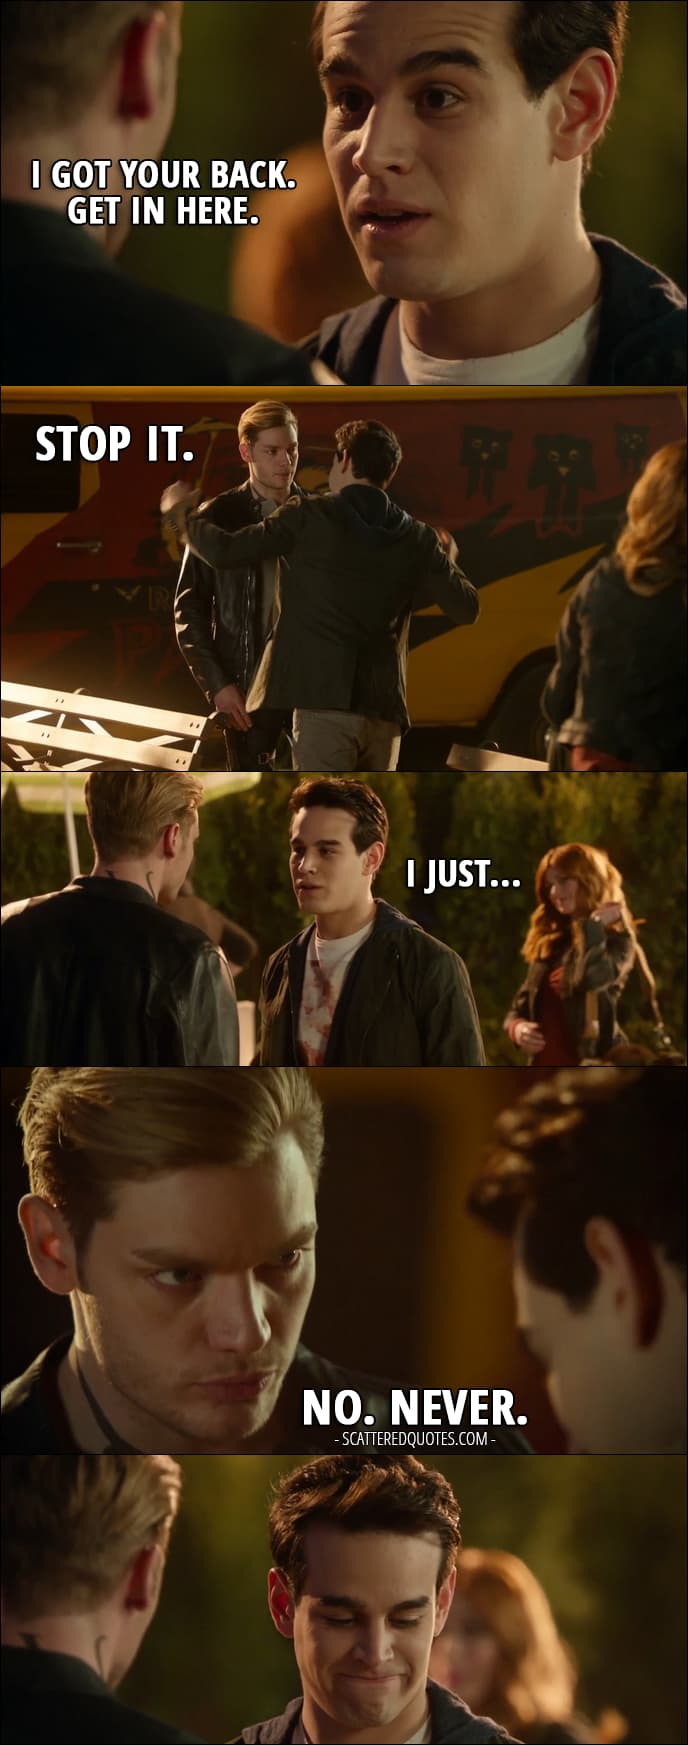 Quote from Shadowhunters 2x11 - Simon Lewis: I got your back. Get in here. Jace Wayland: Stop it. Simon Lewis: I just... Jace Wayland: No. Never.